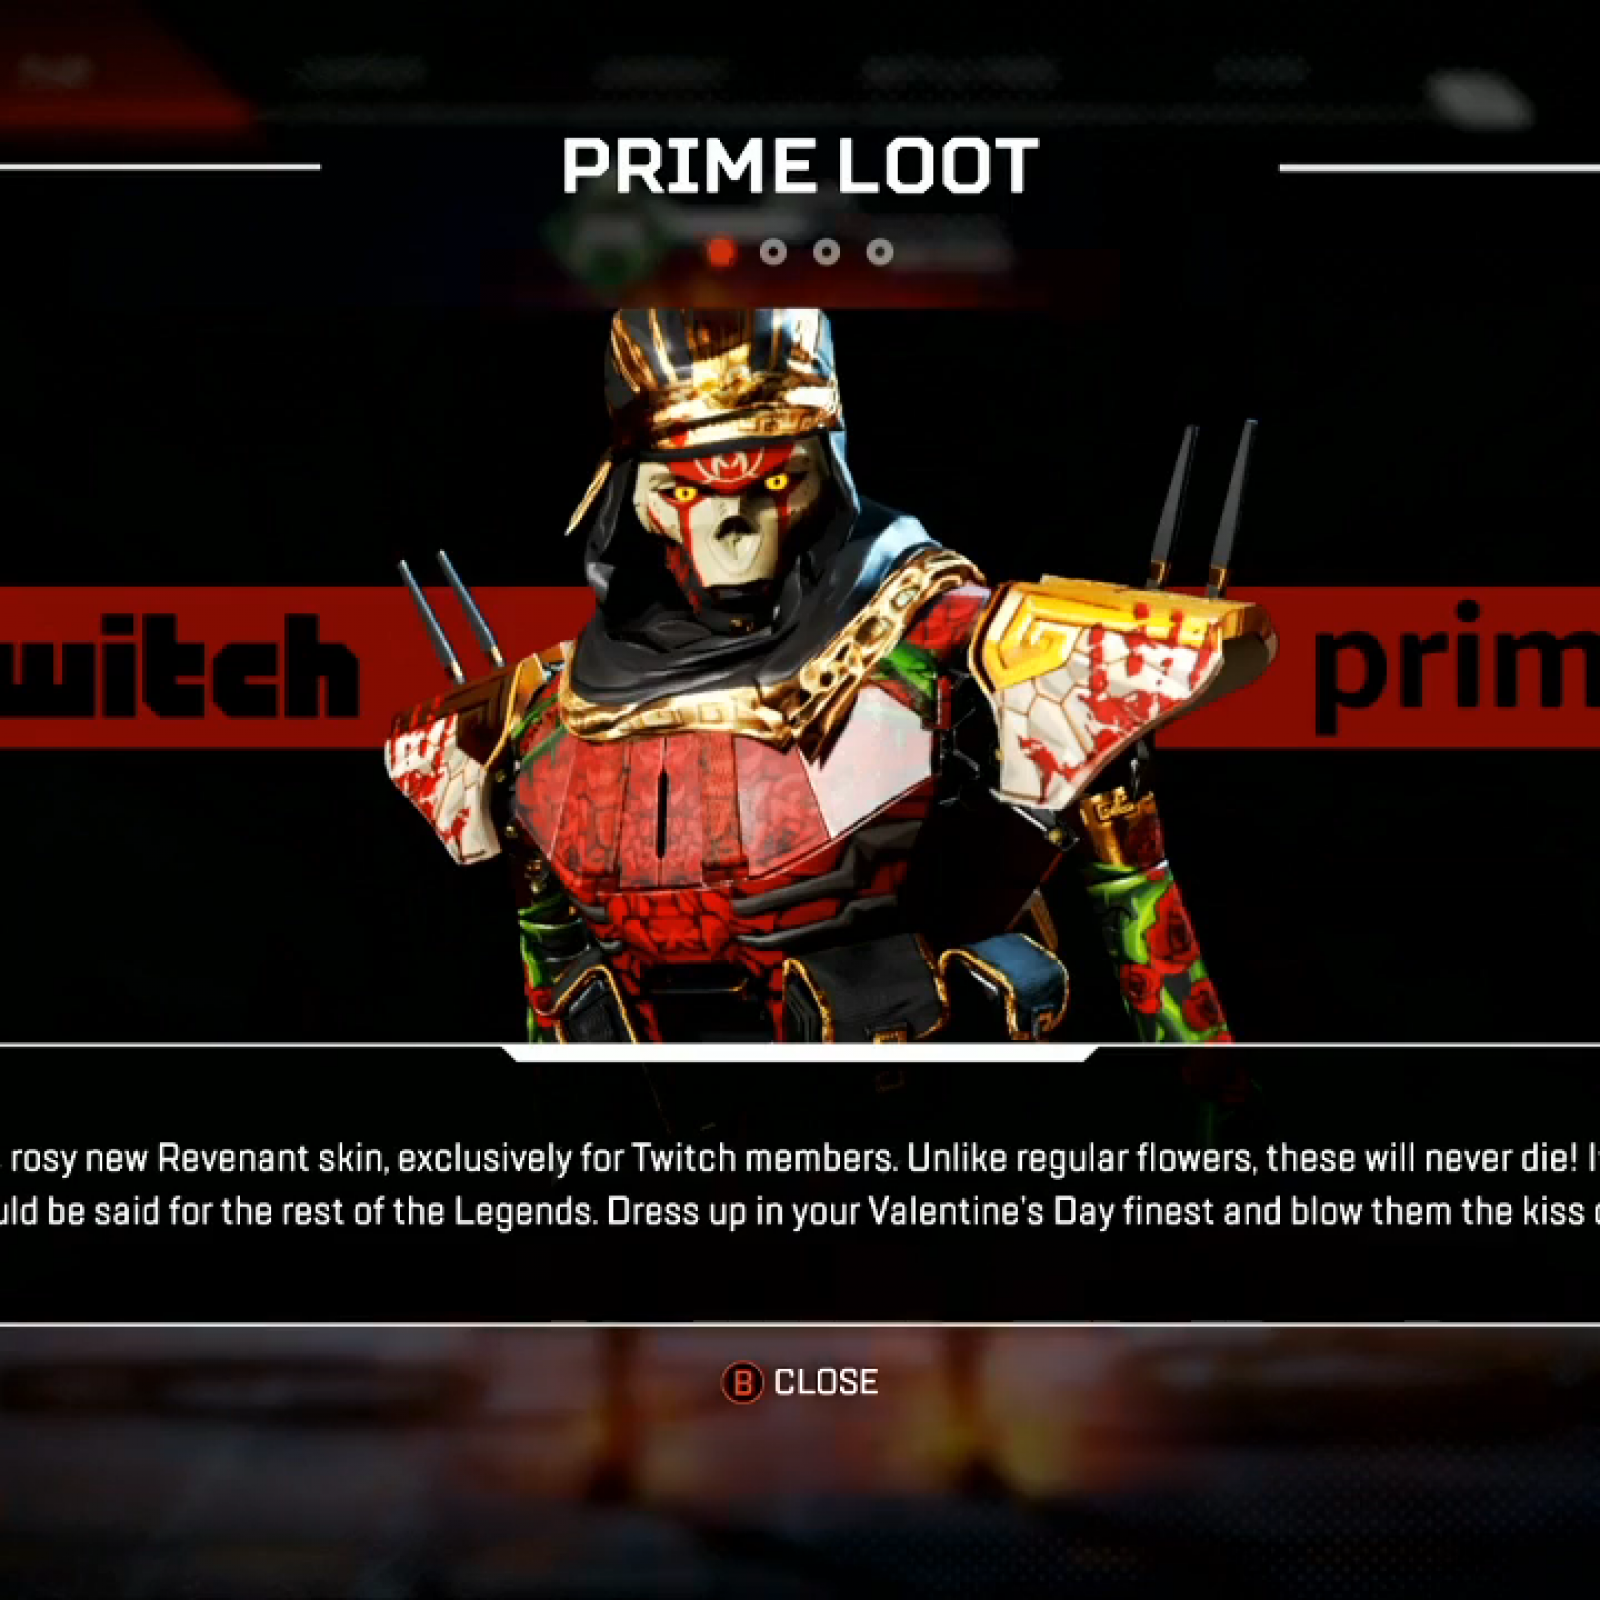 Apex Legends Twitch Prime Loot Guide Claim Loot Link To Ea To Get Revenant Skin